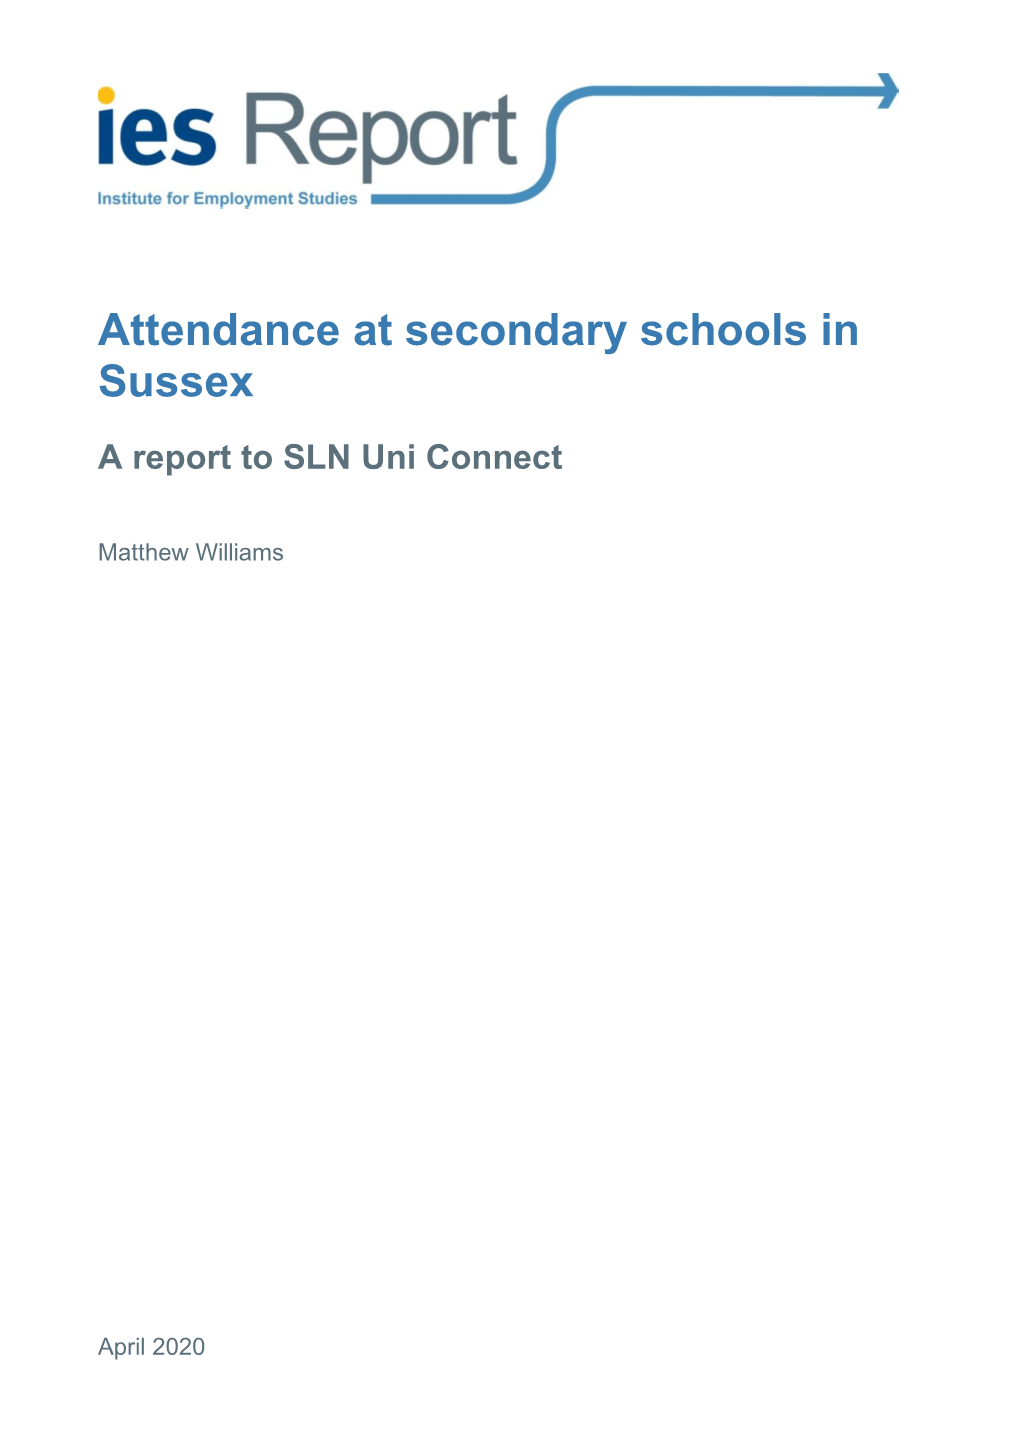 Attendance at Secondary Schools in Sussex Report